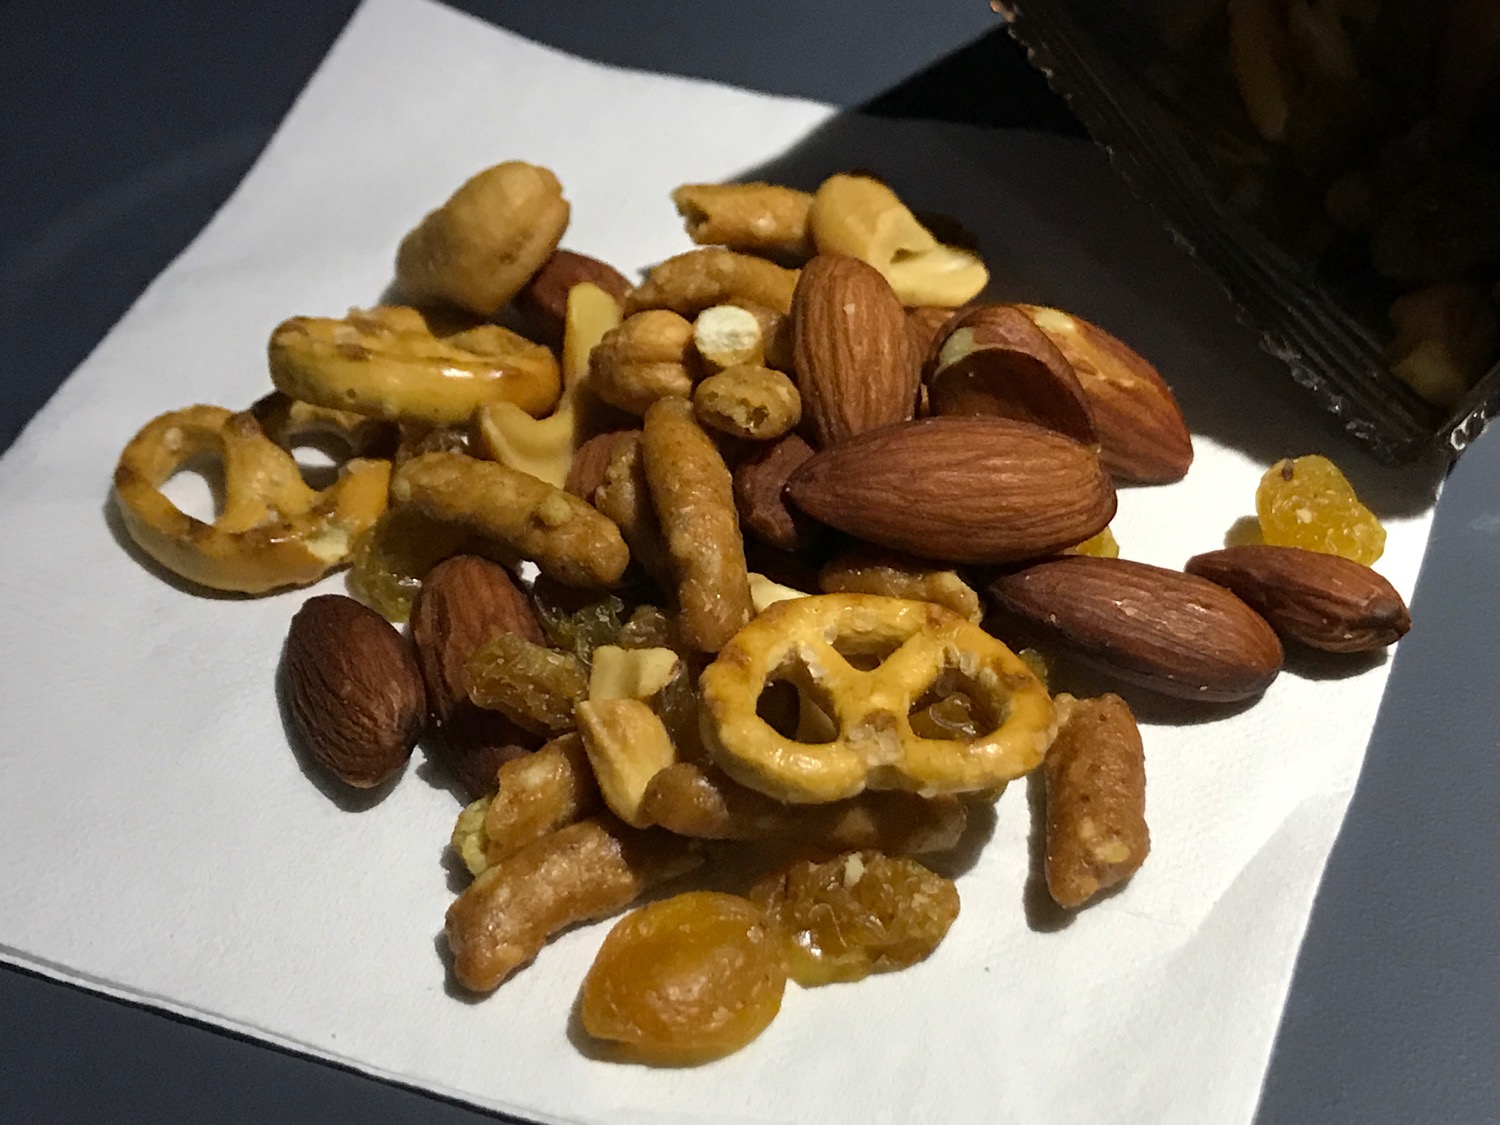 a pile of nuts and raisins on a napkin